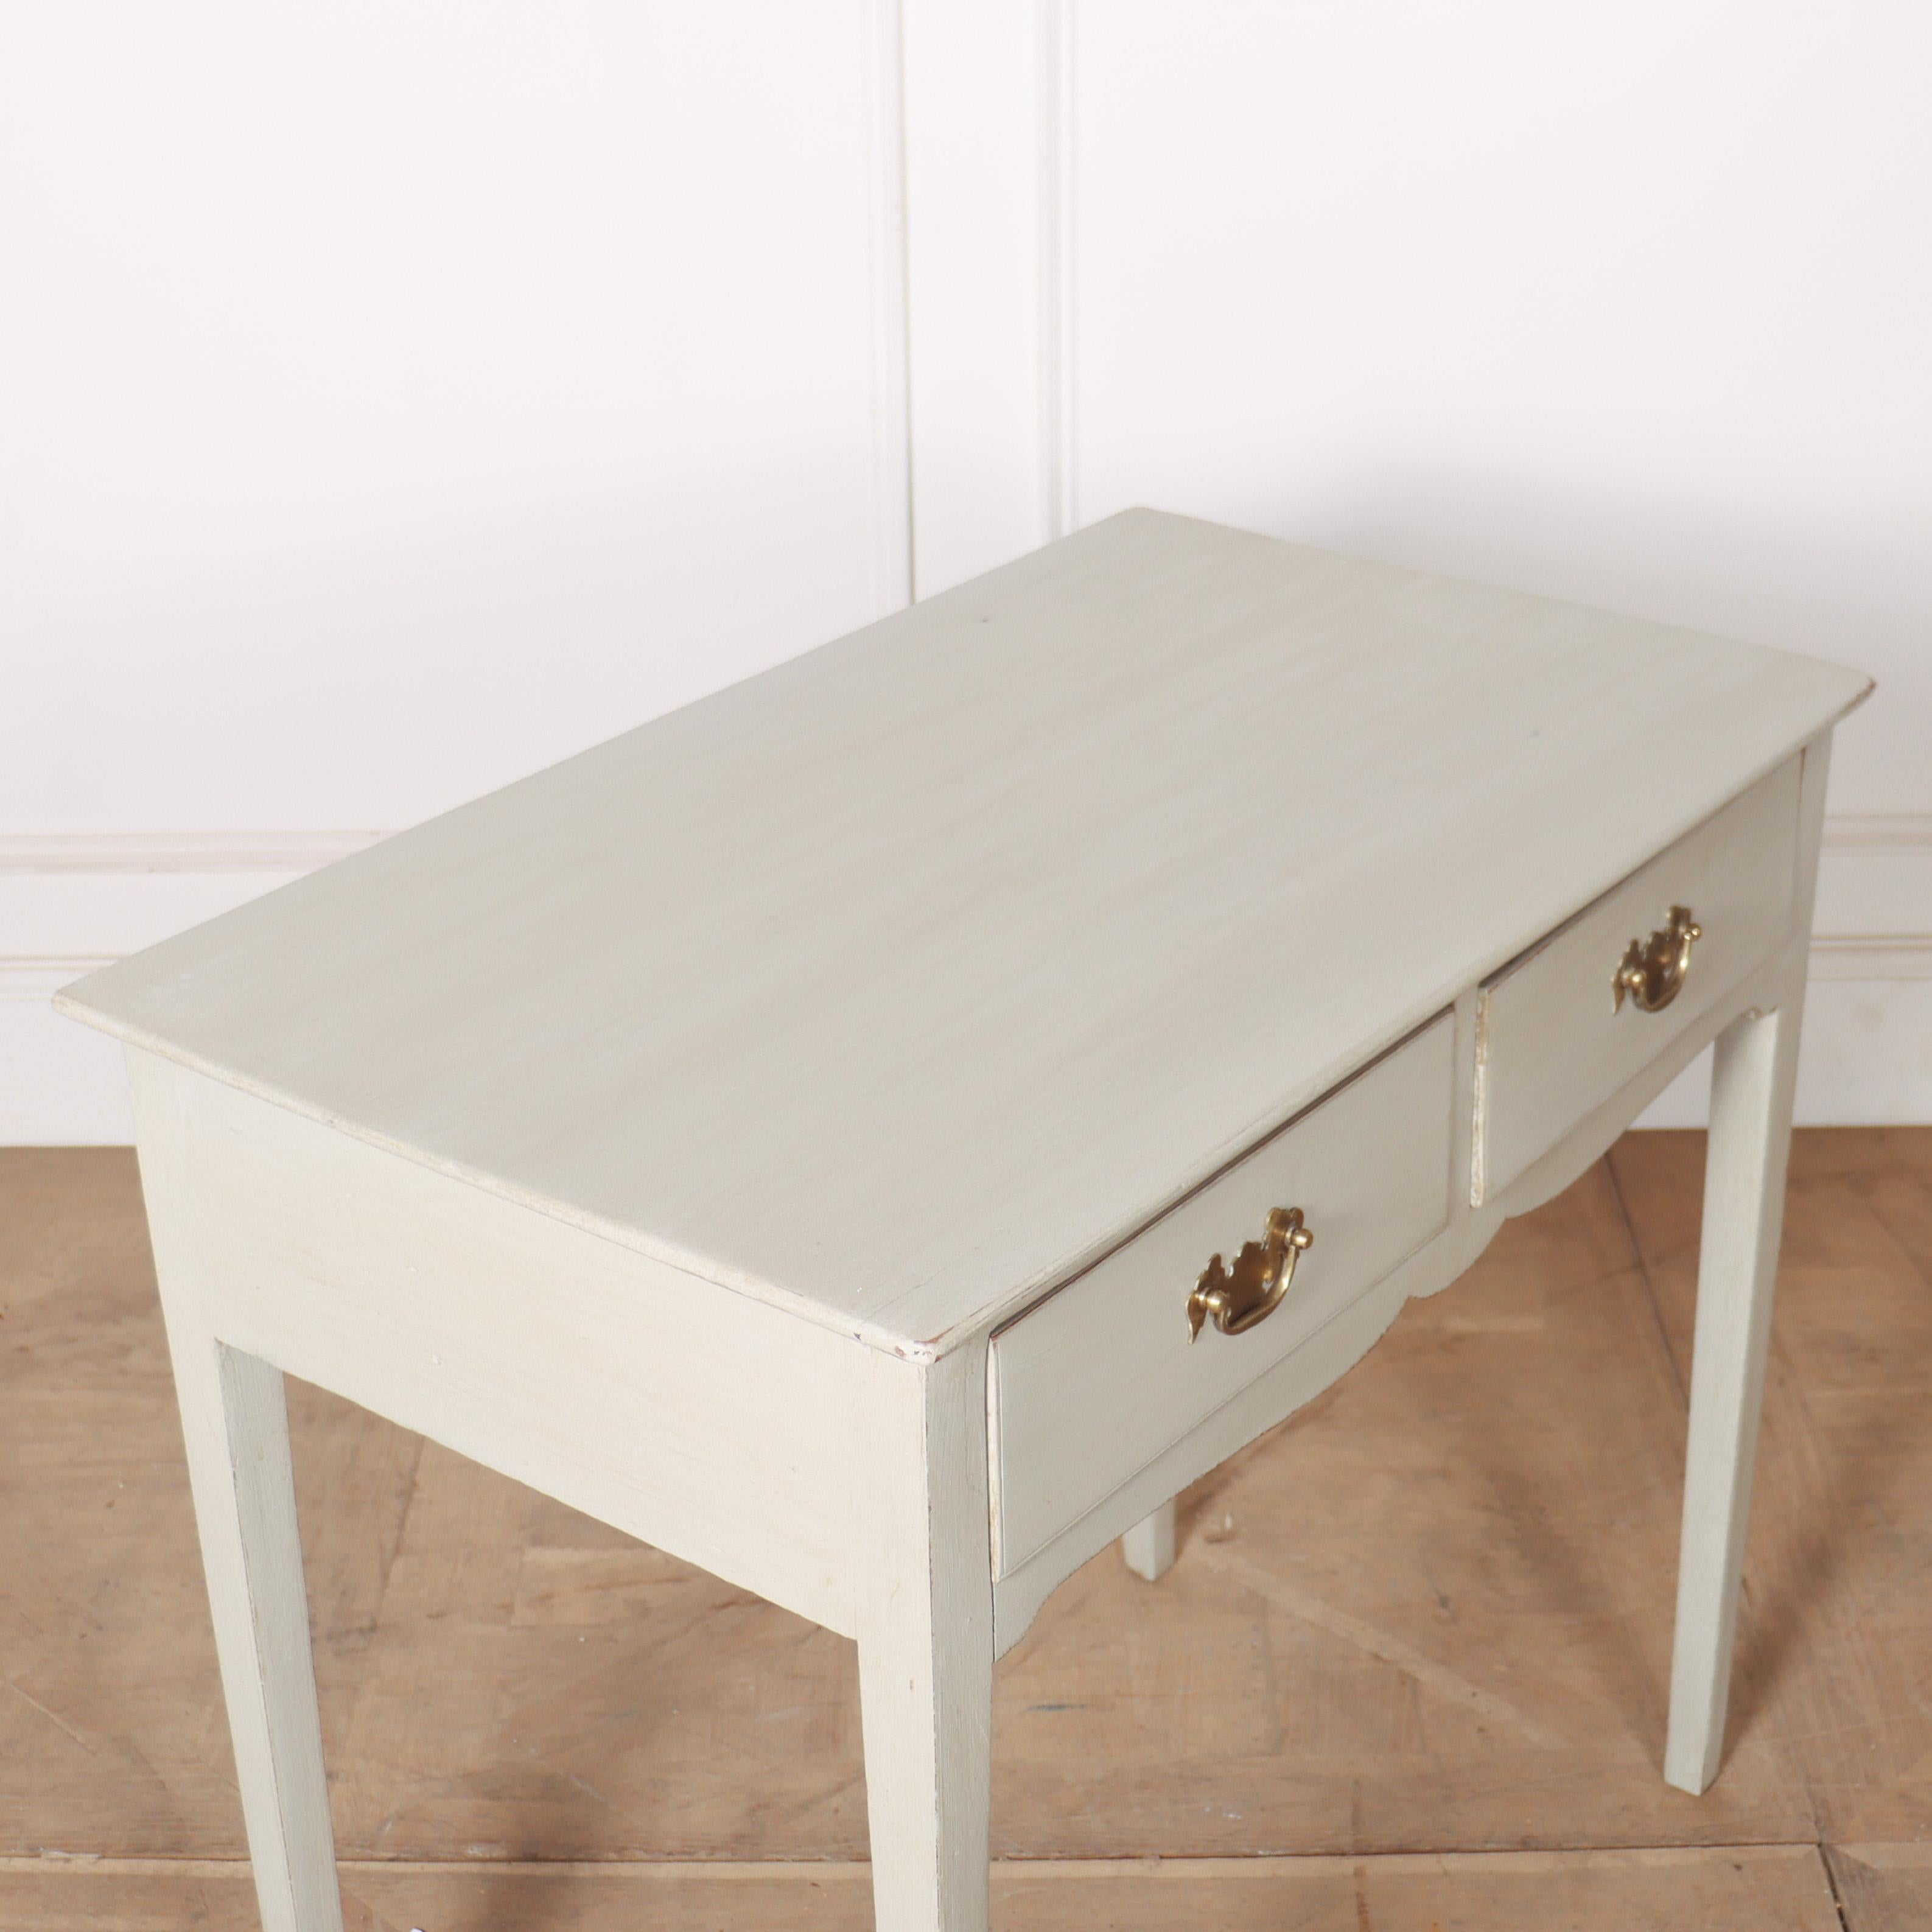 English Painted Lamp Table In Good Condition For Sale In Leamington Spa, Warwickshire